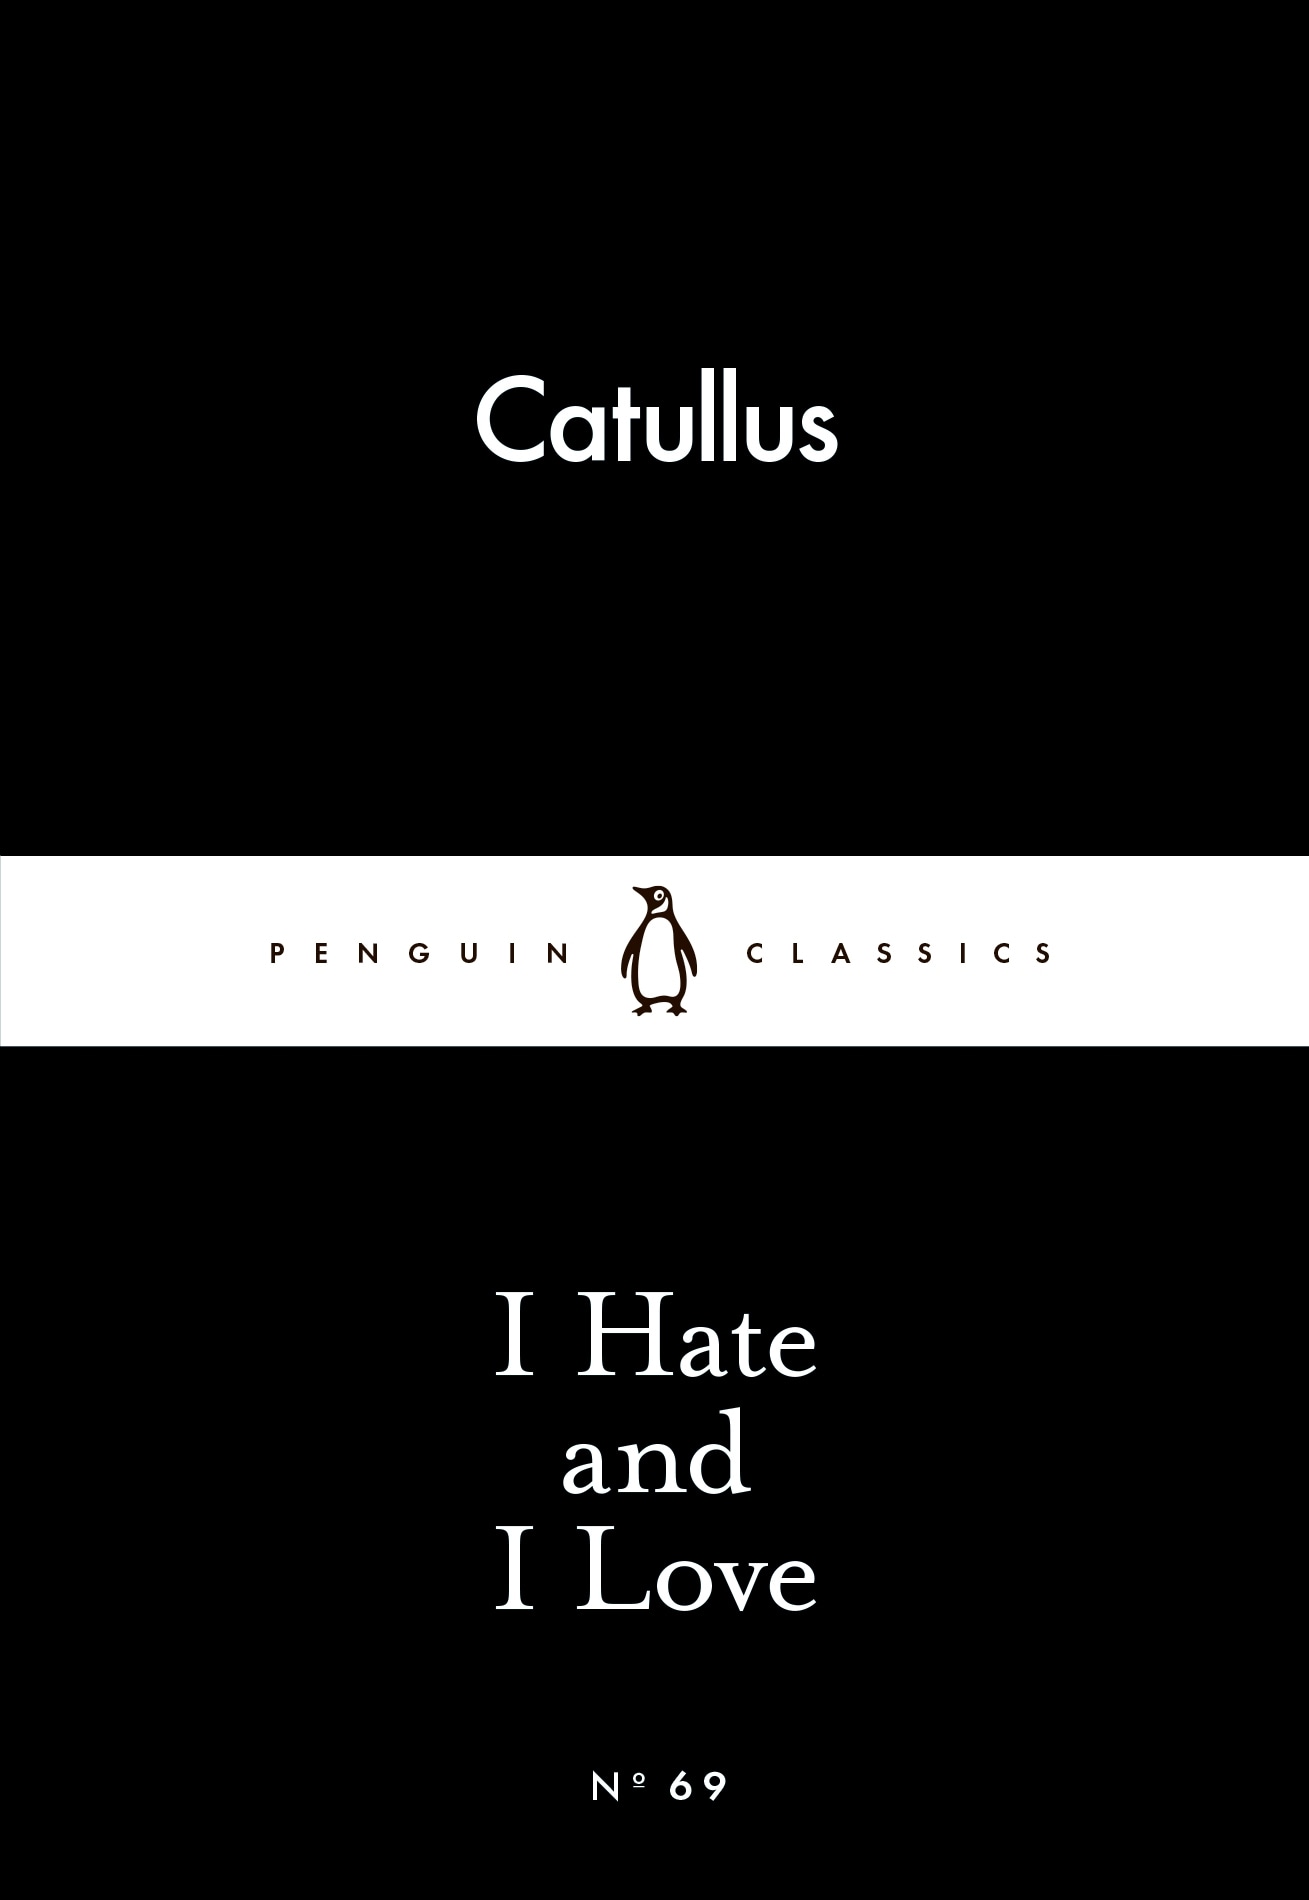 Book “I Hate and I Love” by Catullus — February 26, 2015